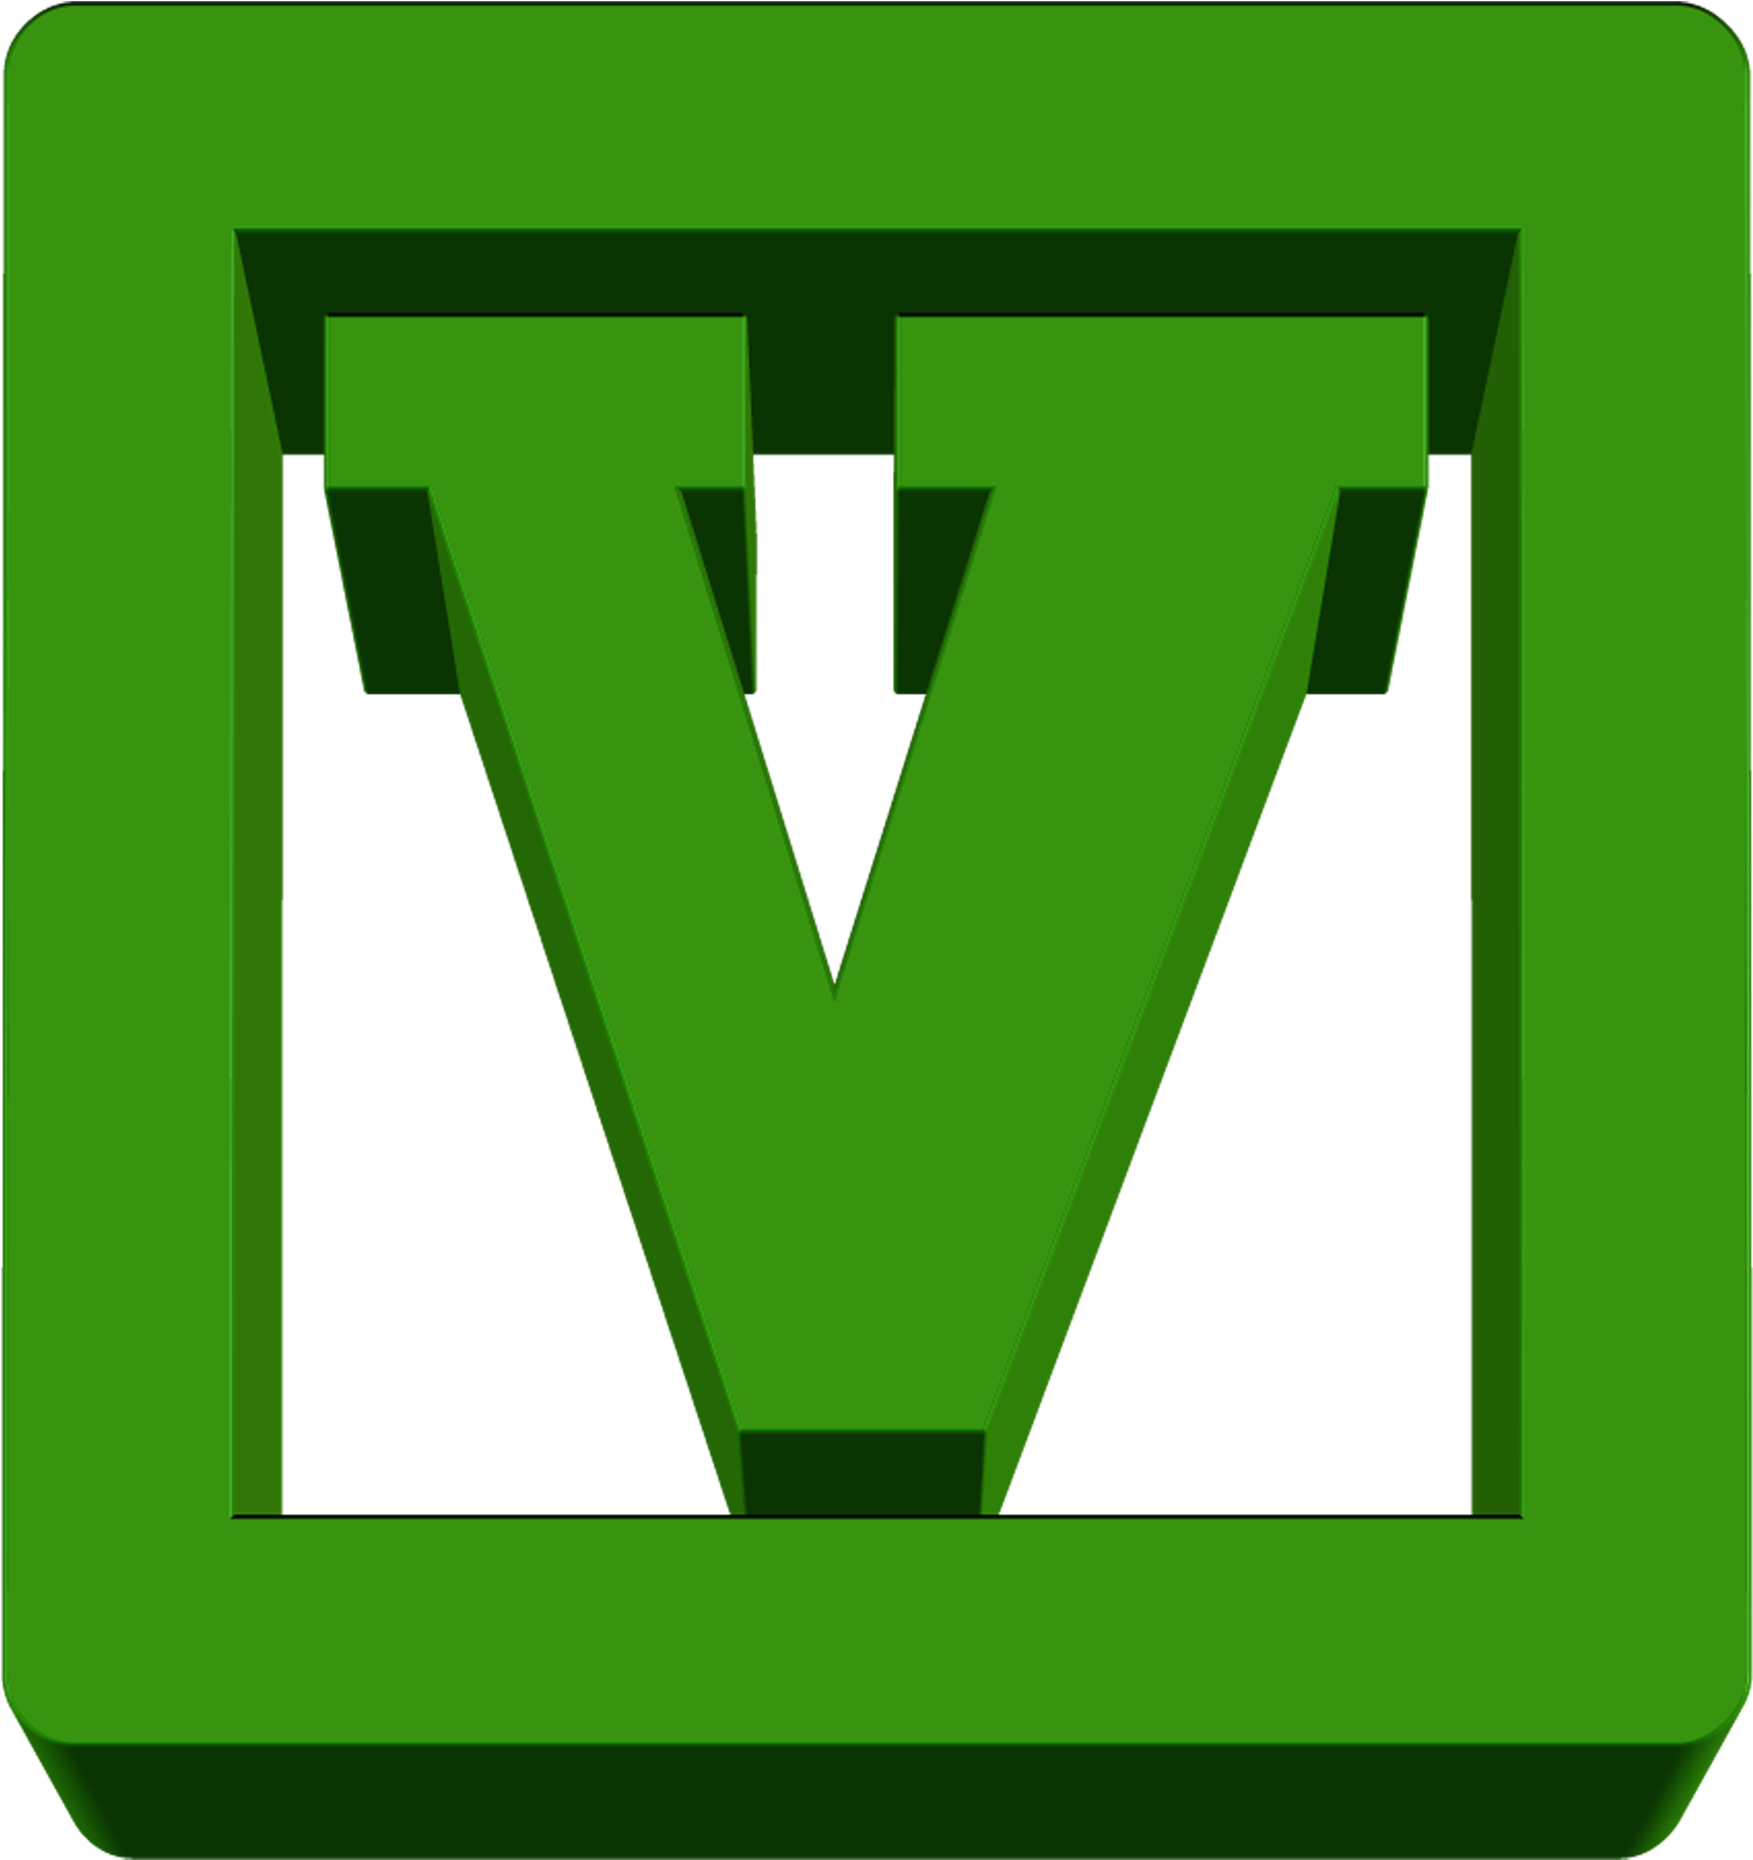 A Green Letter V In A Square